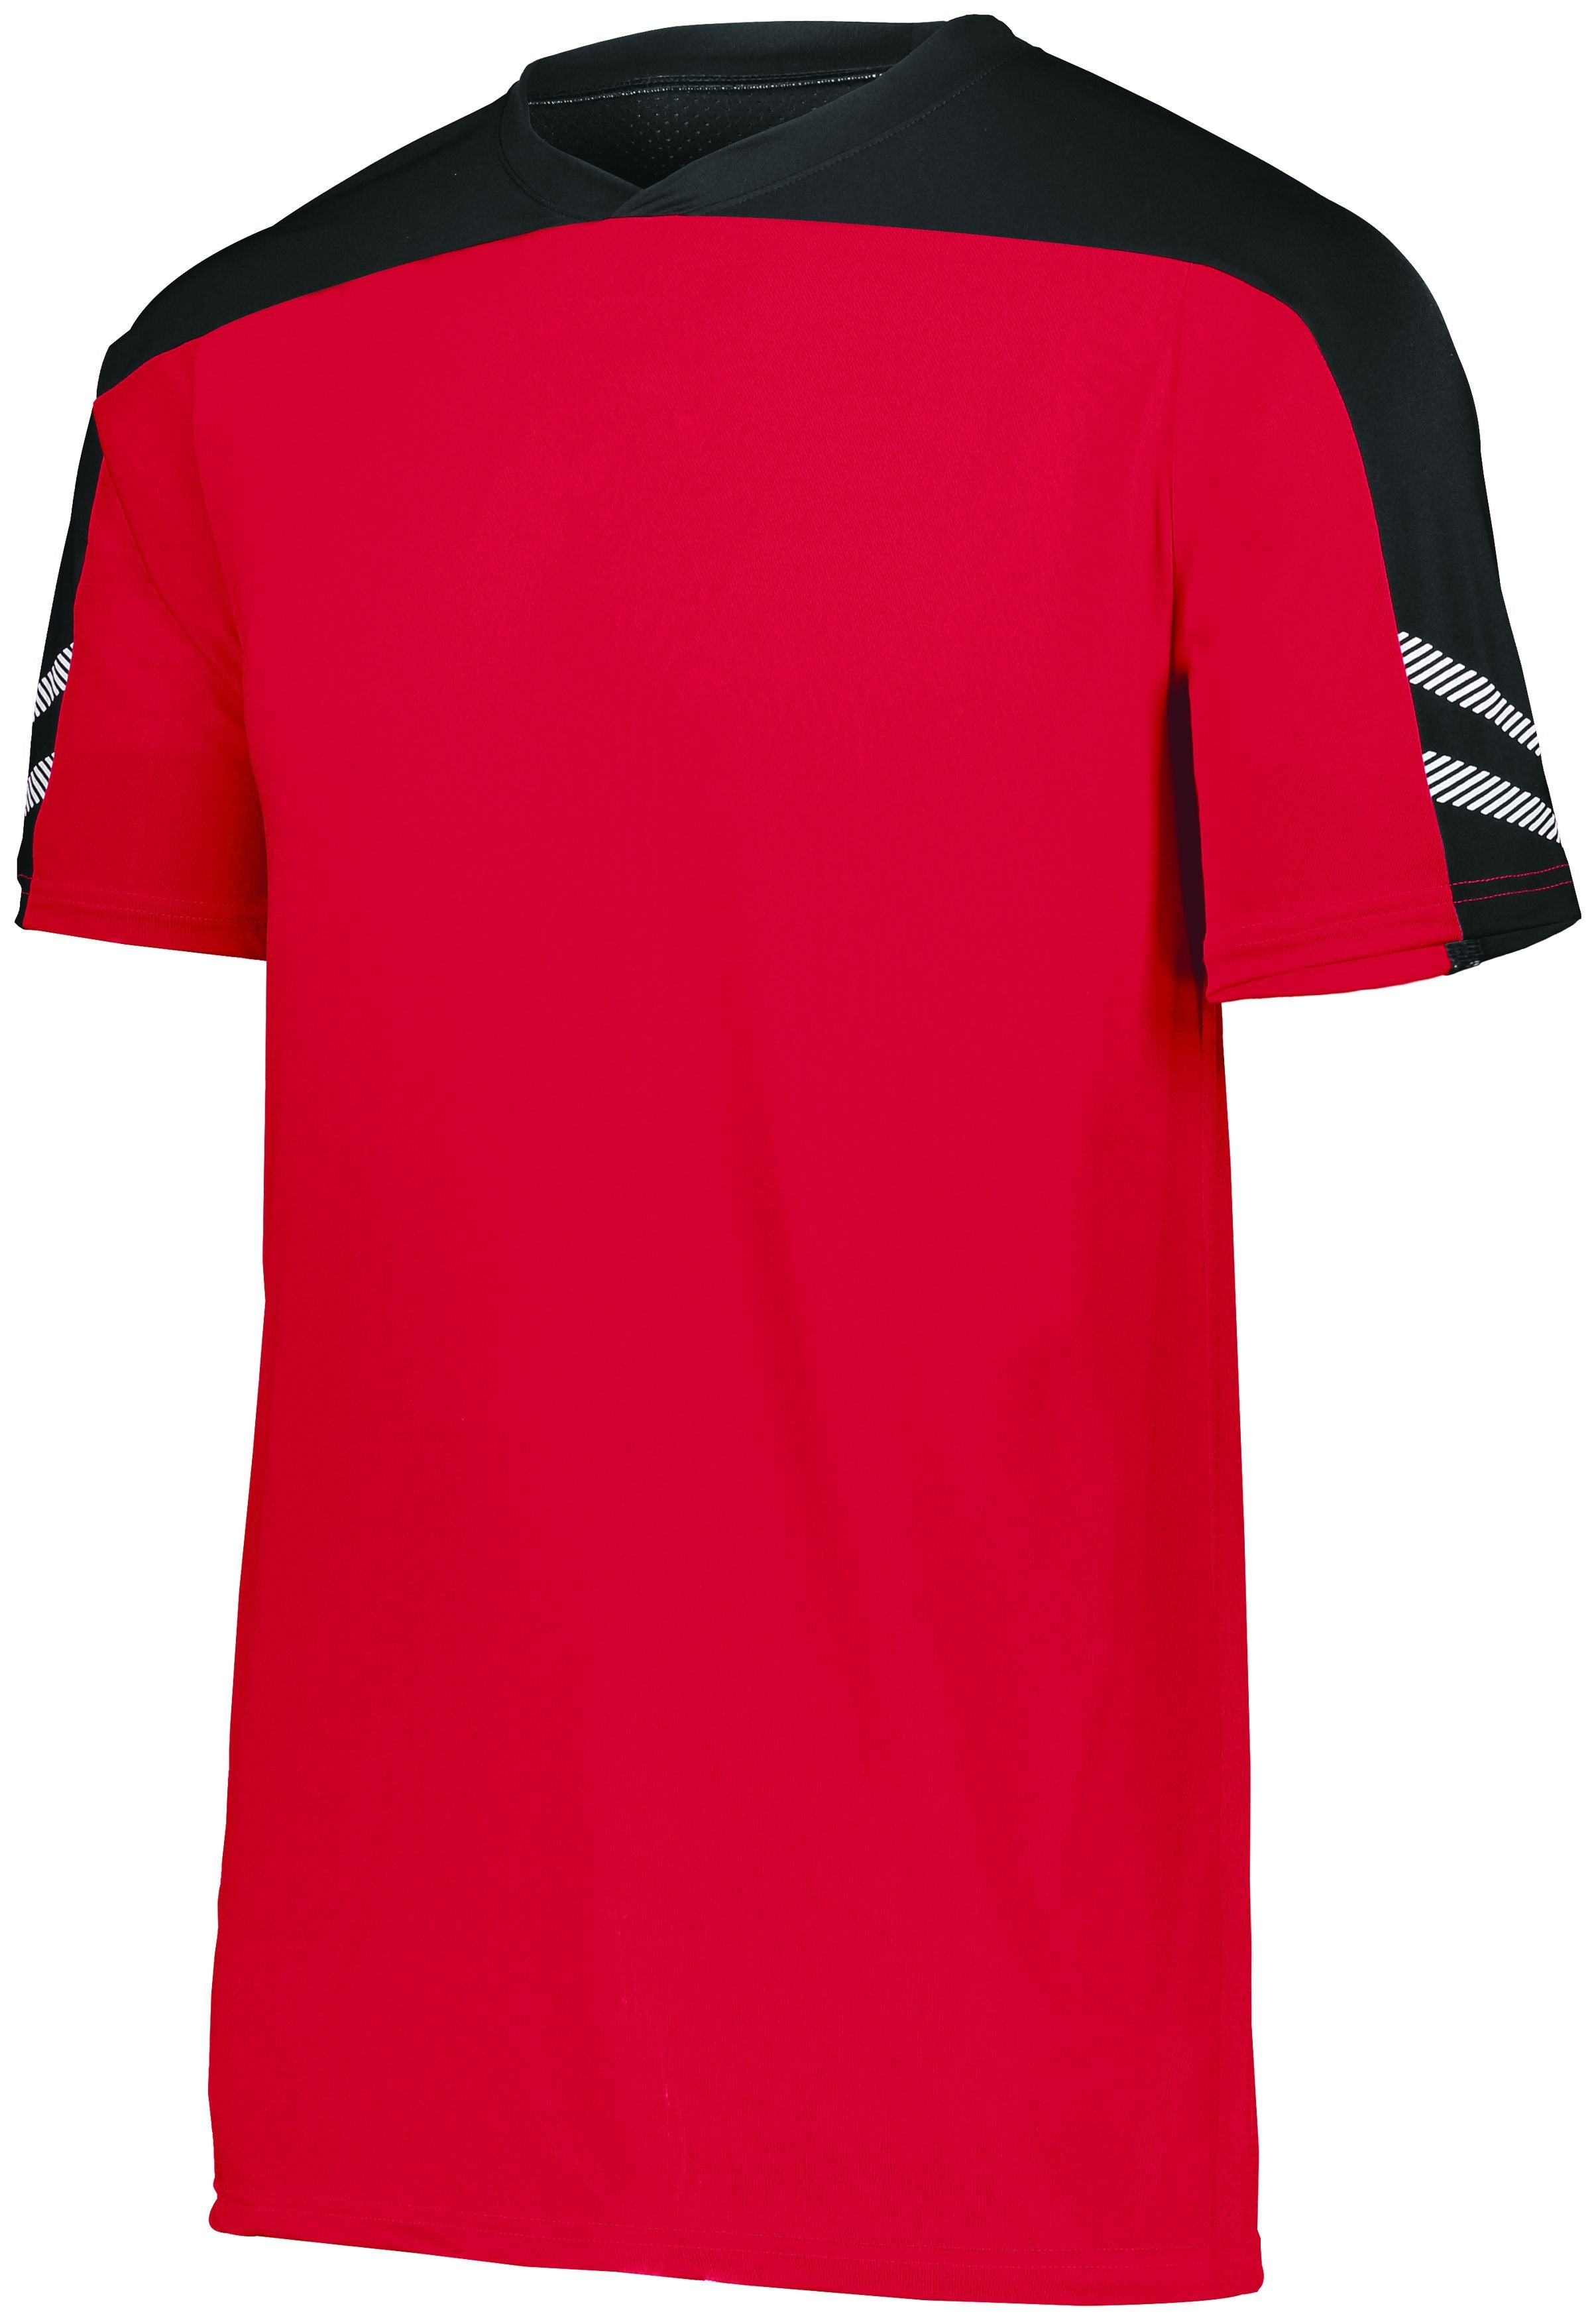 High 5 Anfield Soccer Jersey in Scarlet/Black/White  -Part of the Adult, Adult-Jersey, High5-Products, Soccer, Shirts, All-Sports-1 product lines at KanaleyCreations.com